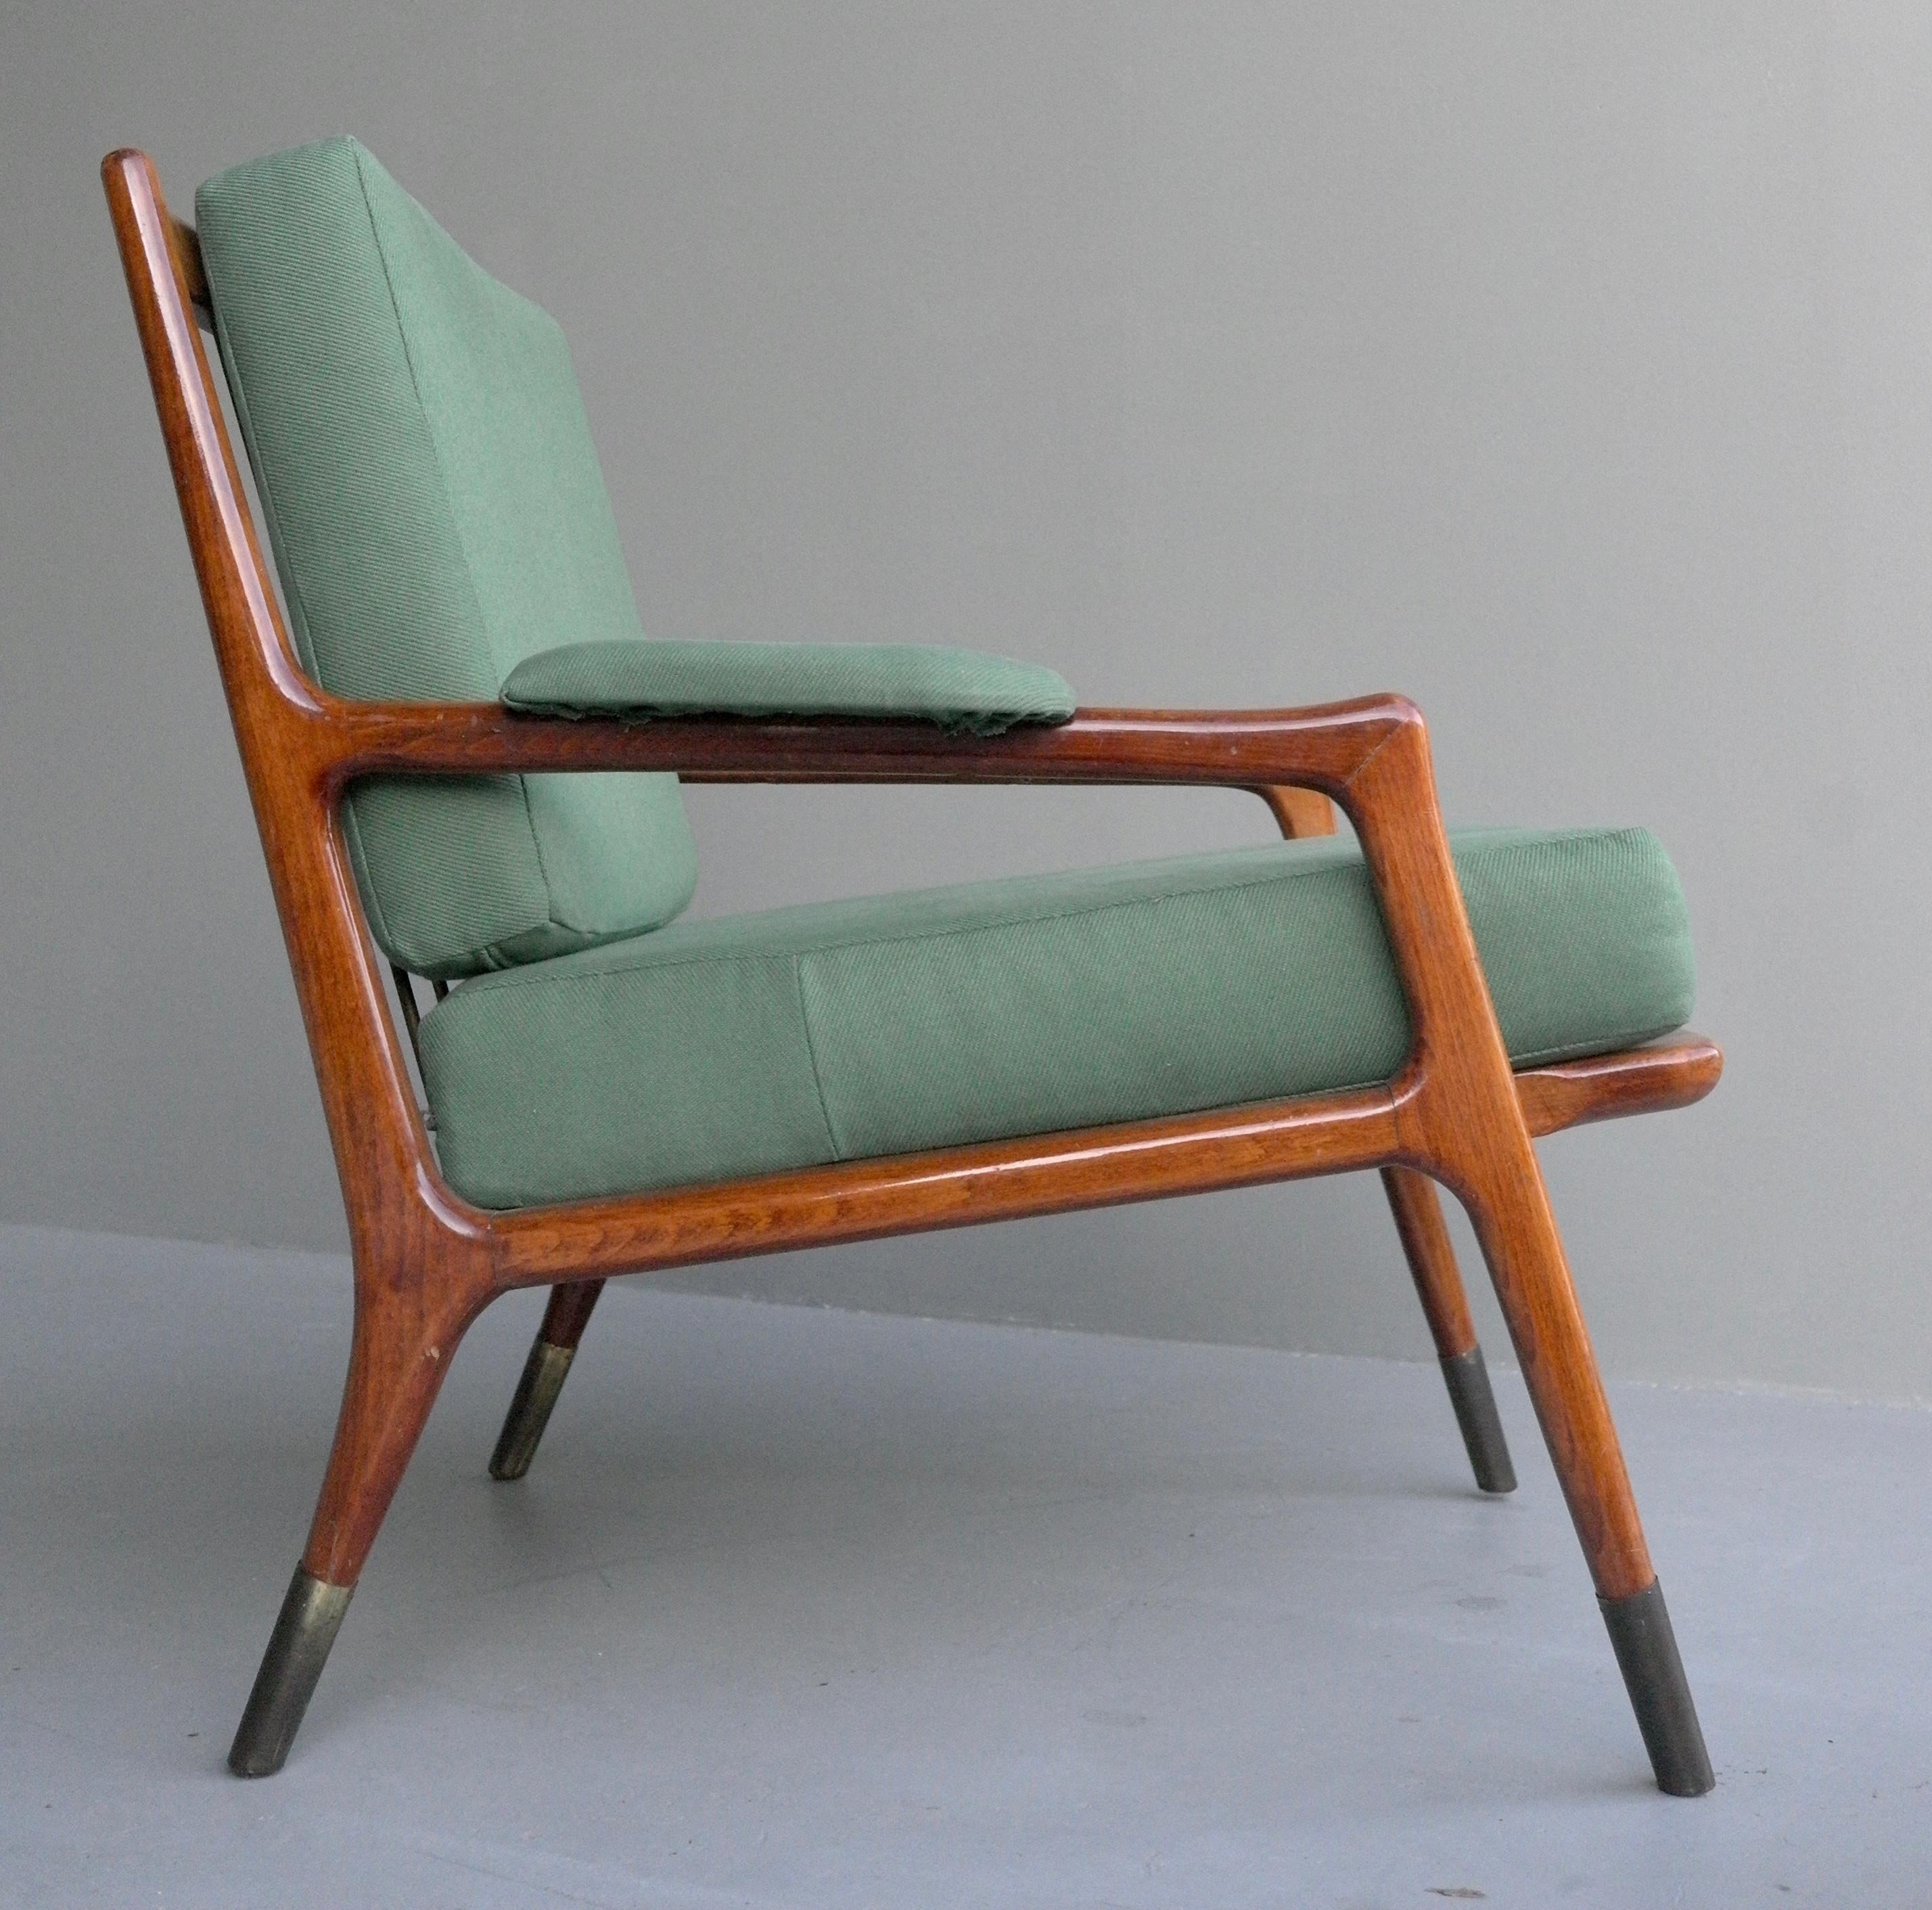 Gio Ponti Style Lounge Chair, Fine Brass Feet and Green Upholstery, Italy, 1955 For Sale 5